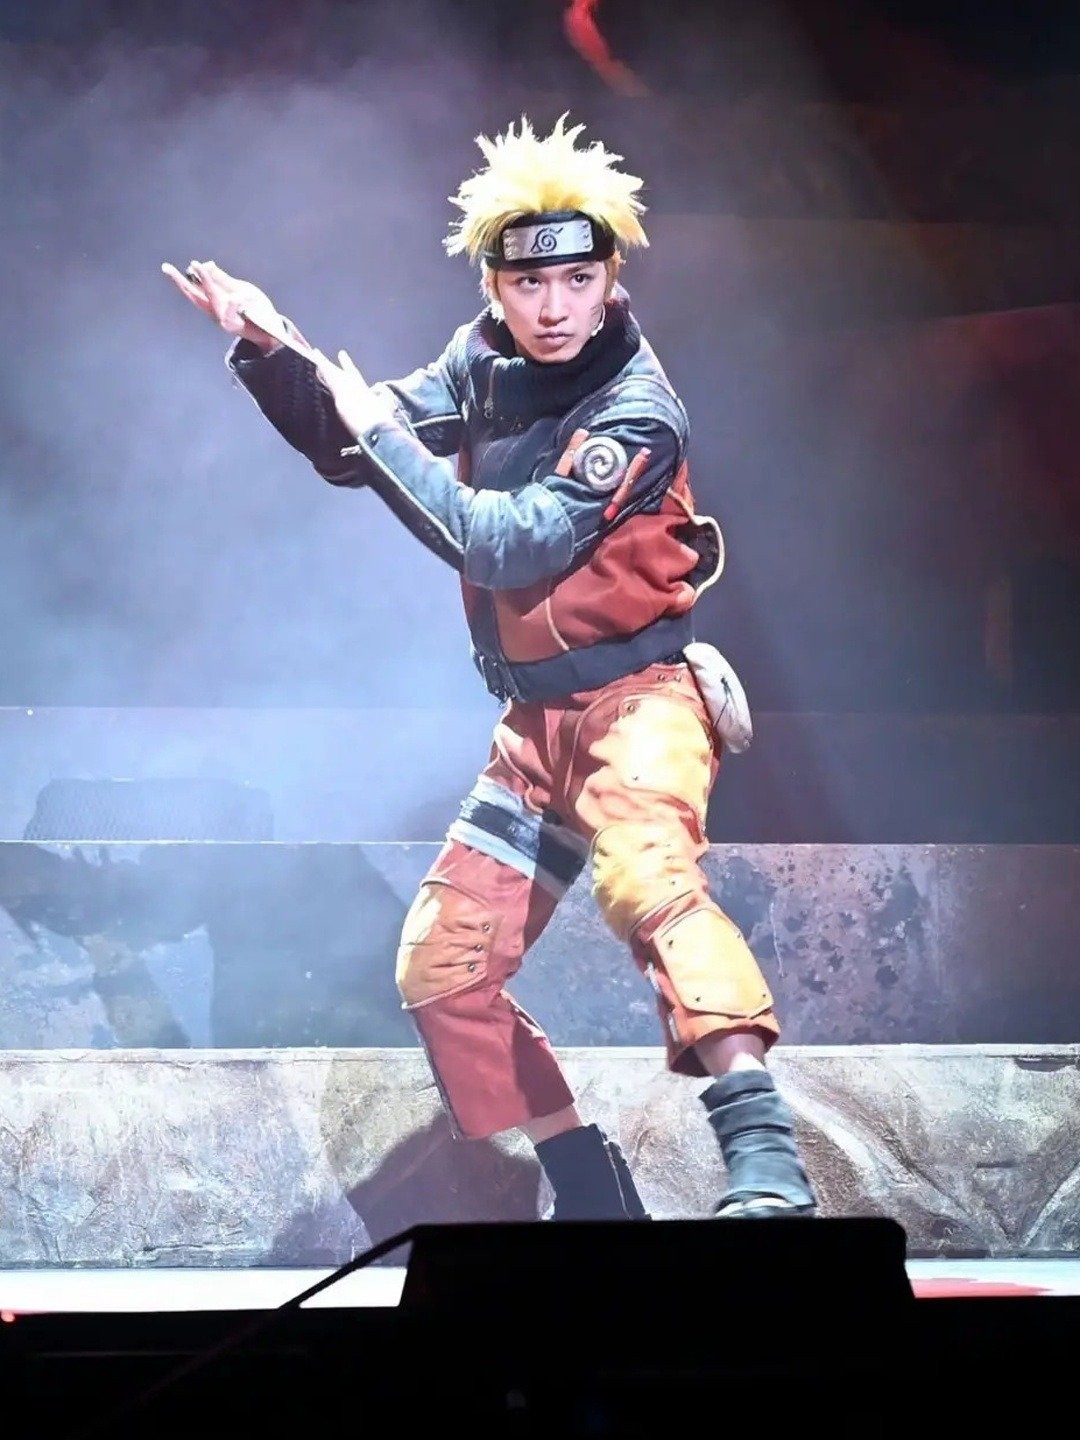 Live Spectacle Naruto' Returns